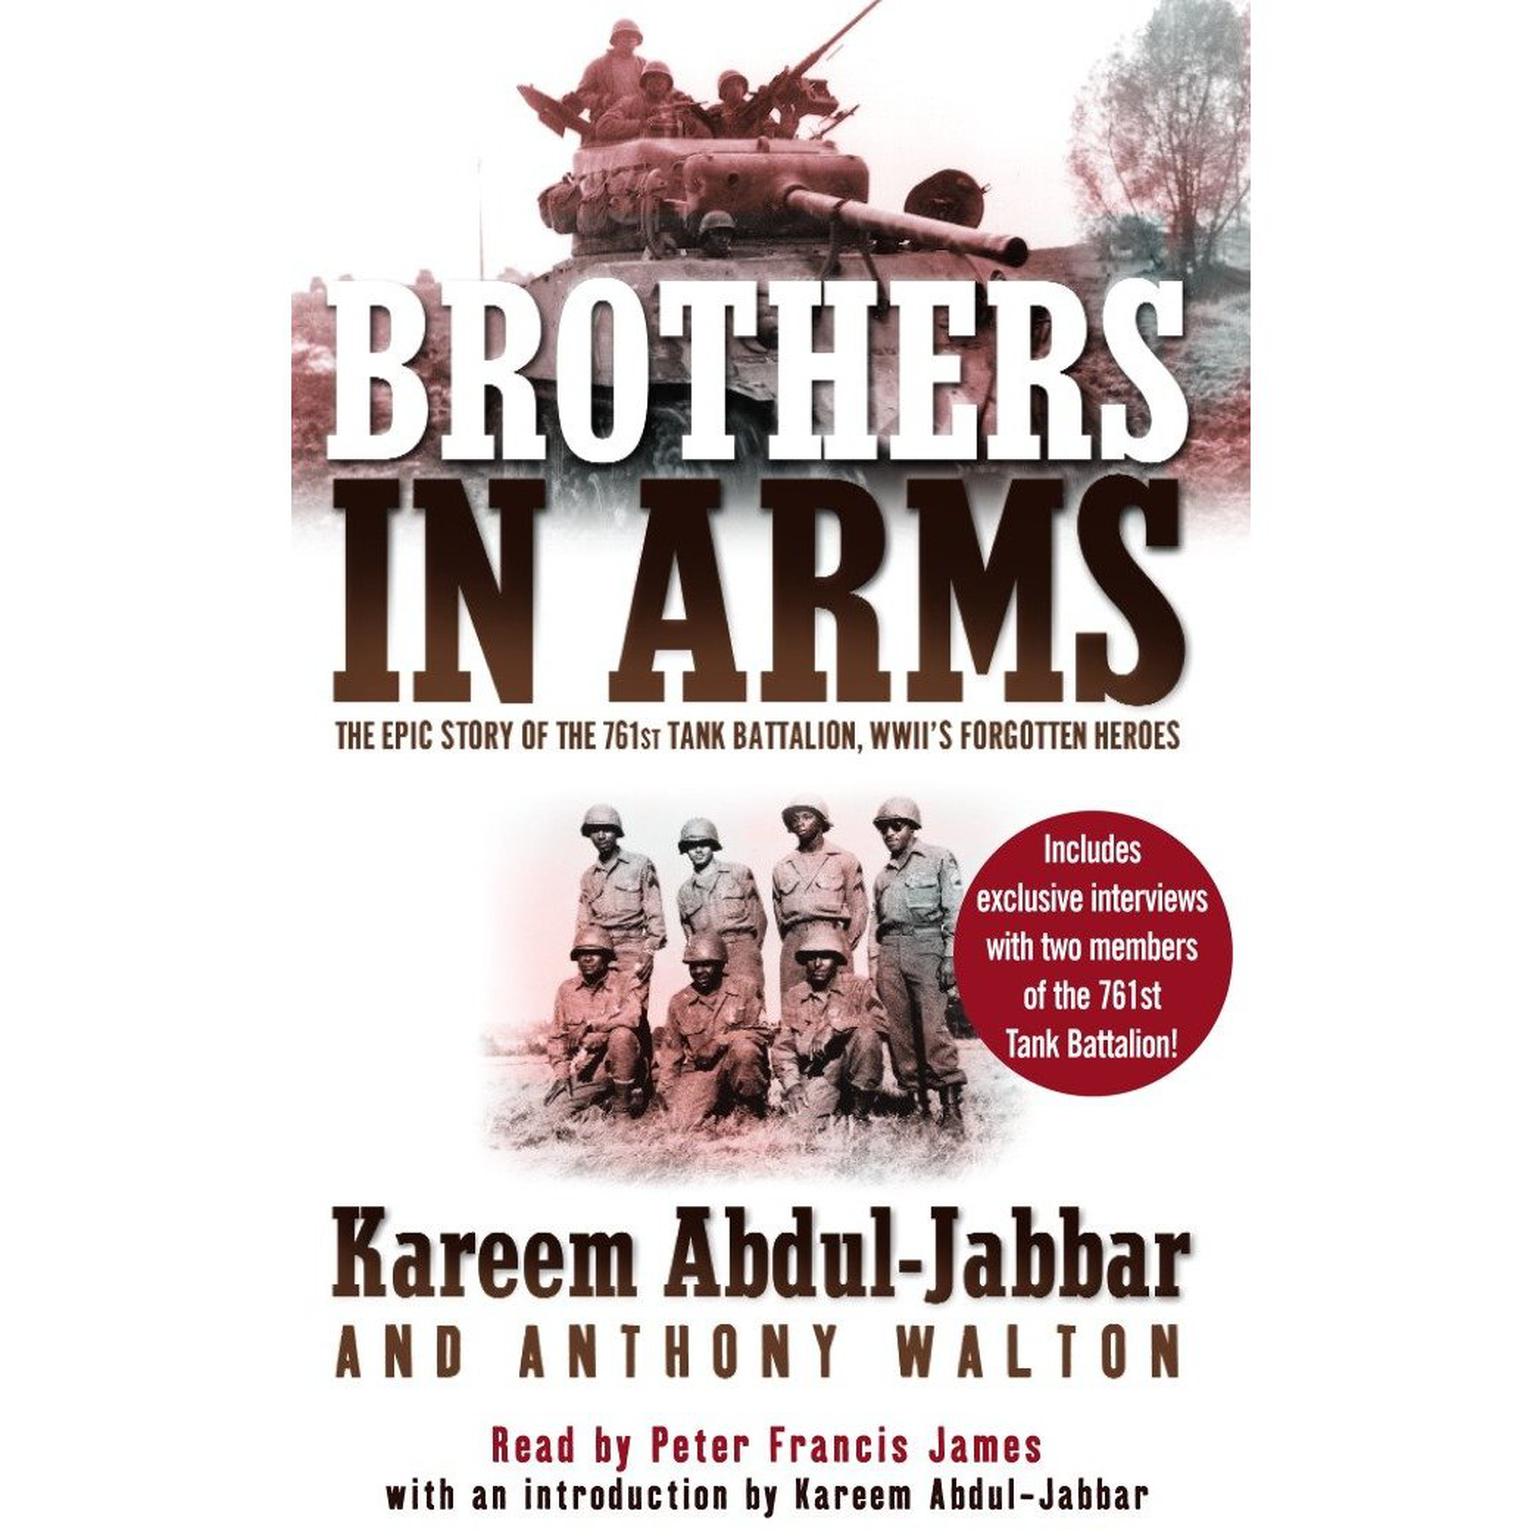 Brothers in Arms (Abridged) Audiobook, by Kareem Abdul-Jabbar